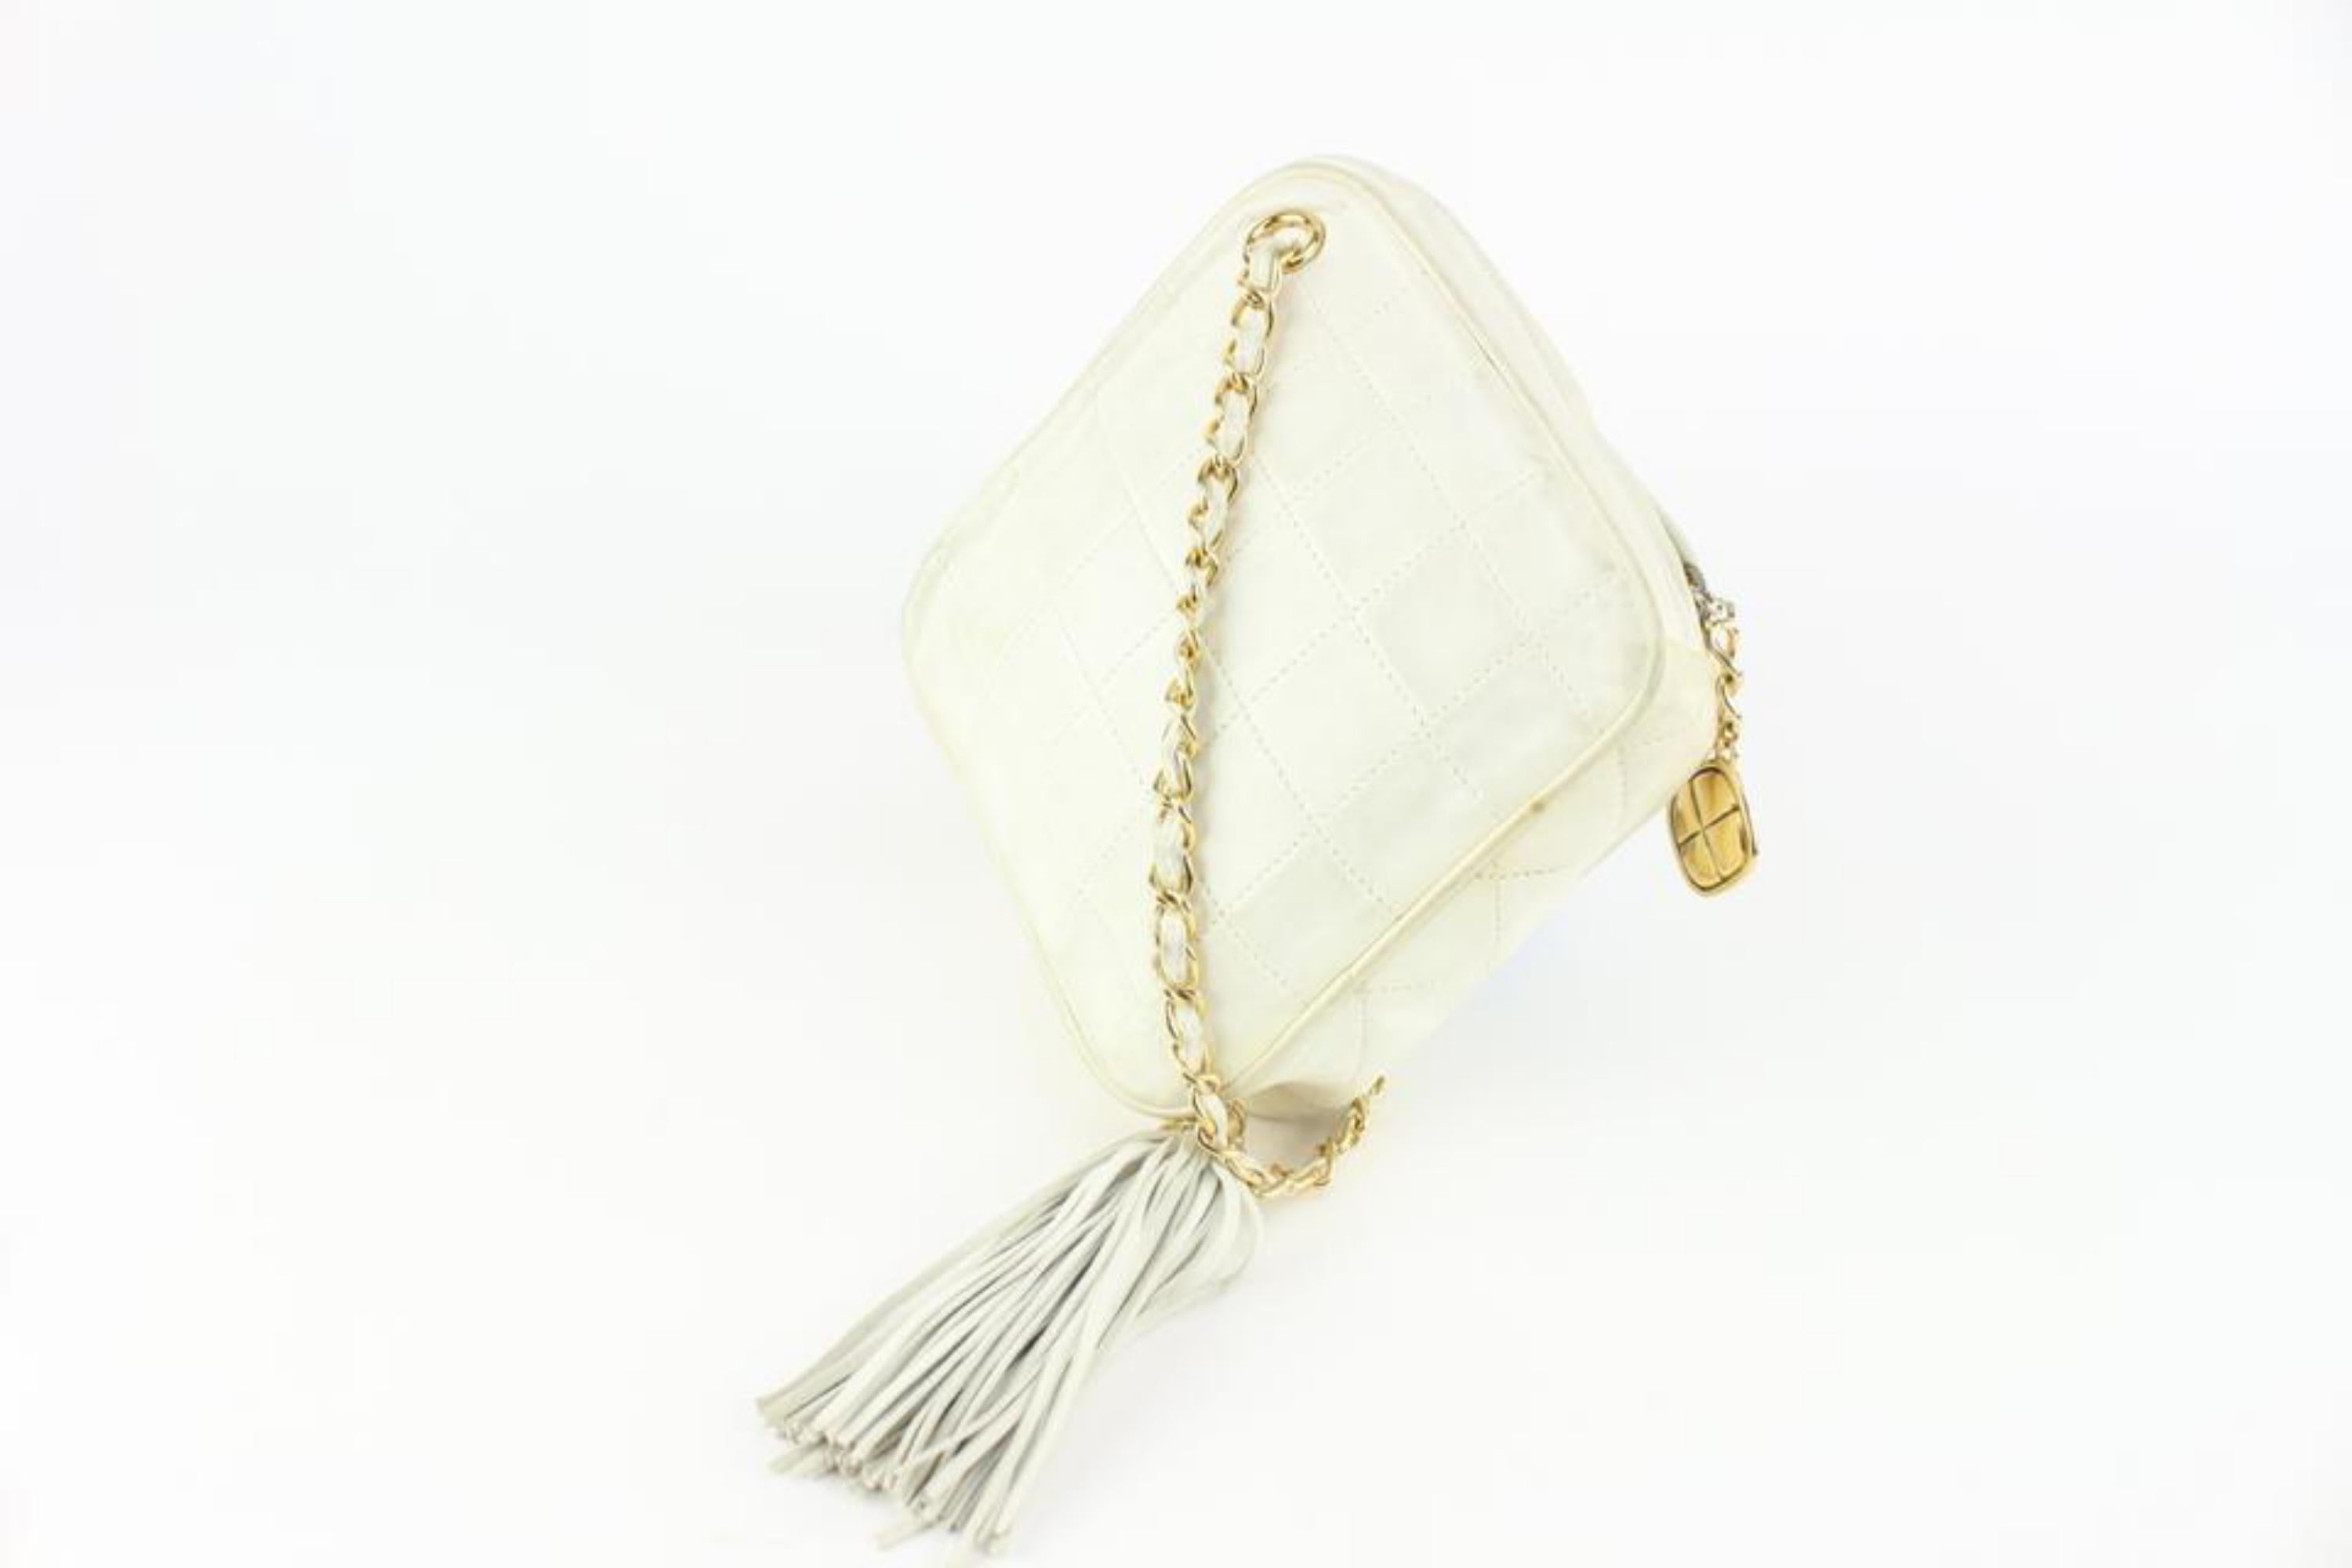 Chanel White Quilted Leather Diamond Clutch on Chain Tassel Bag 1123c30 For Sale 7